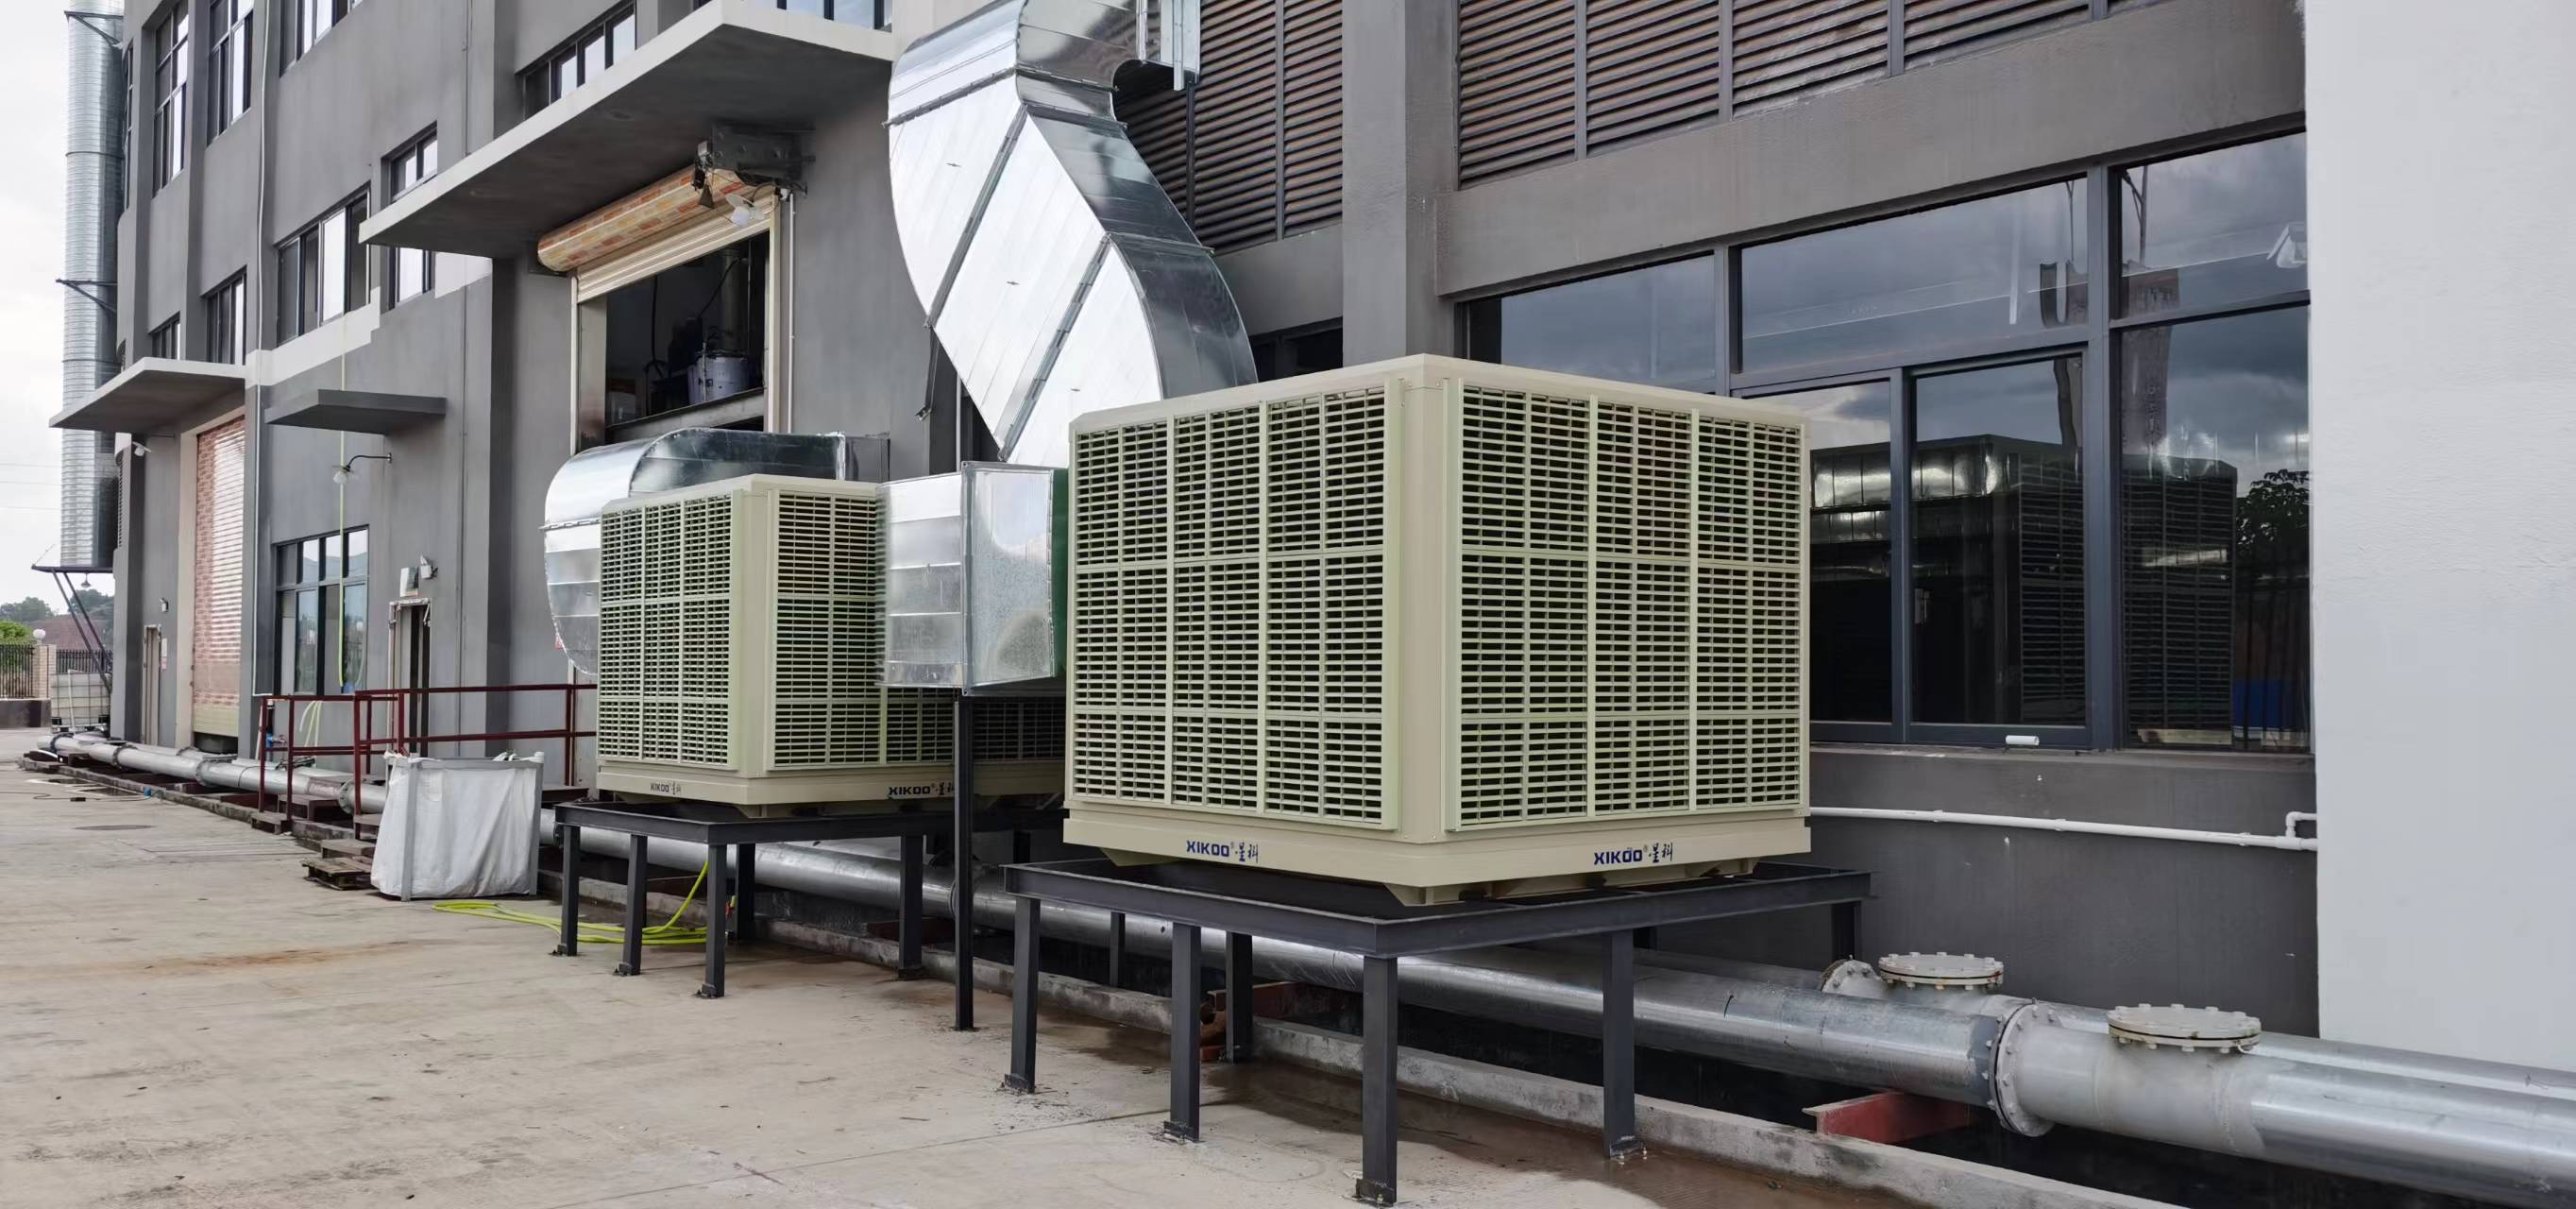 Why choose to install air coolers for plant cooling?